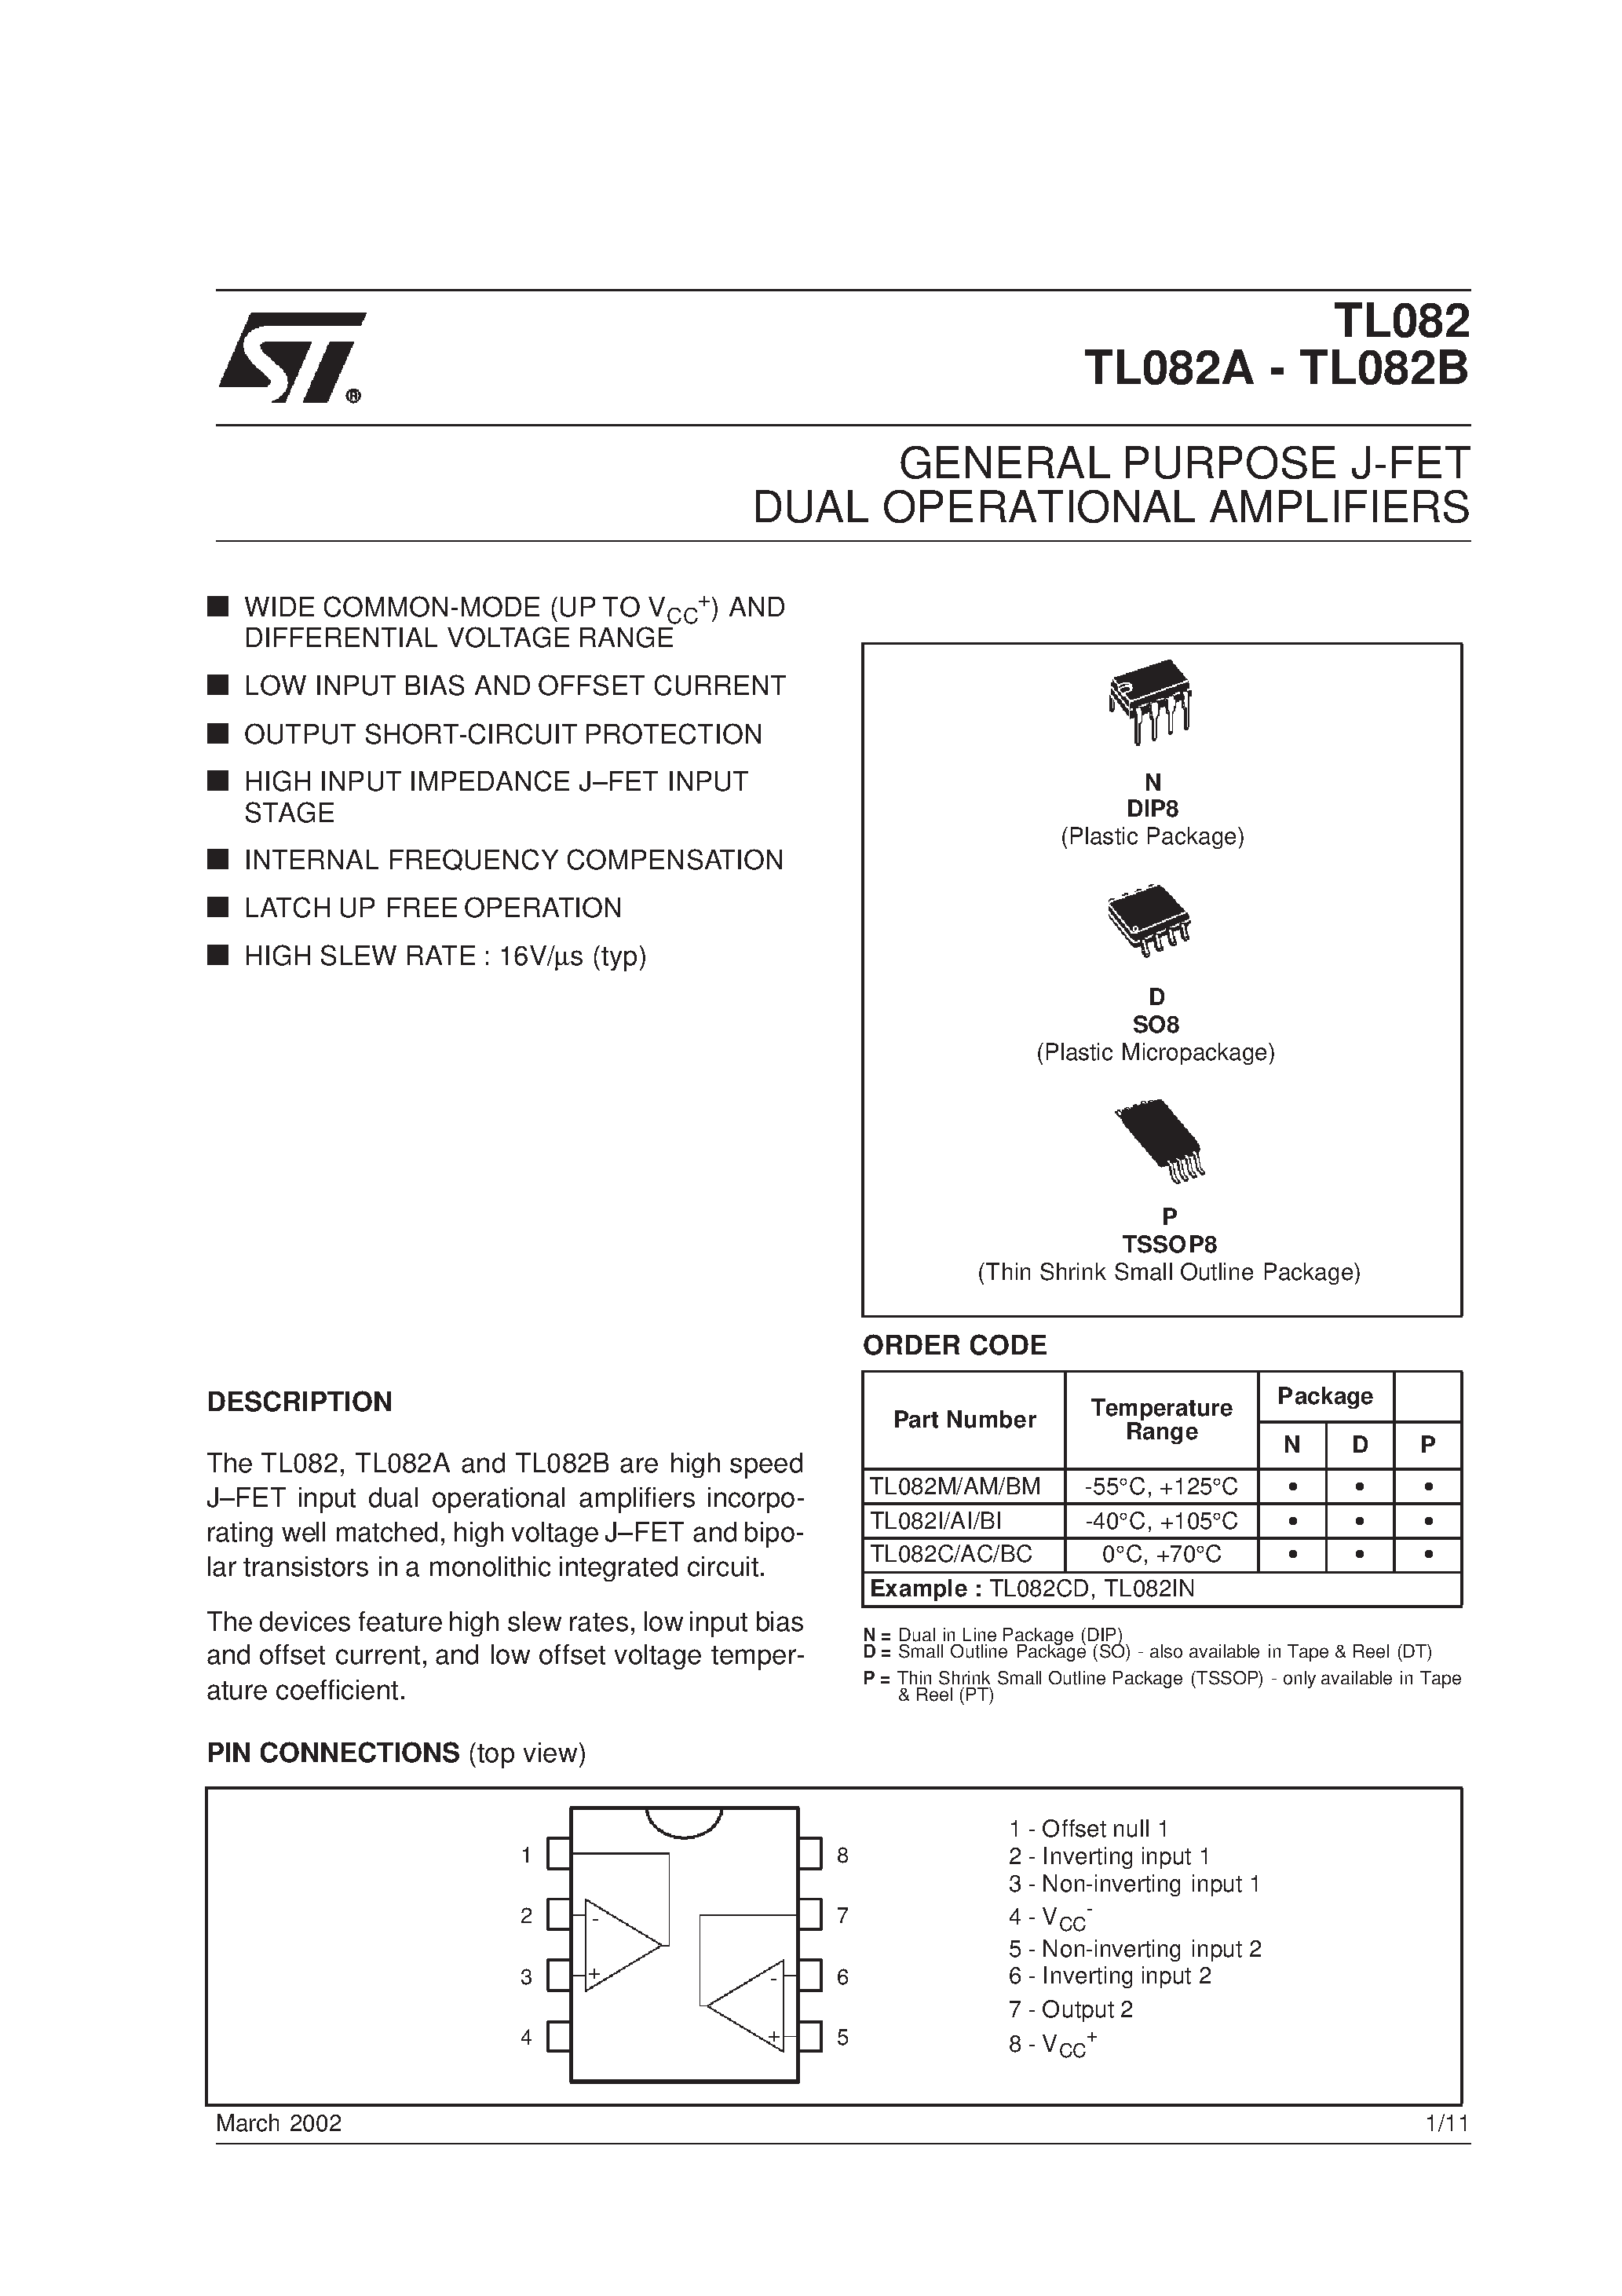 Datasheet TL082BCP - GENERAL PURPOSE J-FET DUAL OPERATIONAL AMPLIFIERS page 1